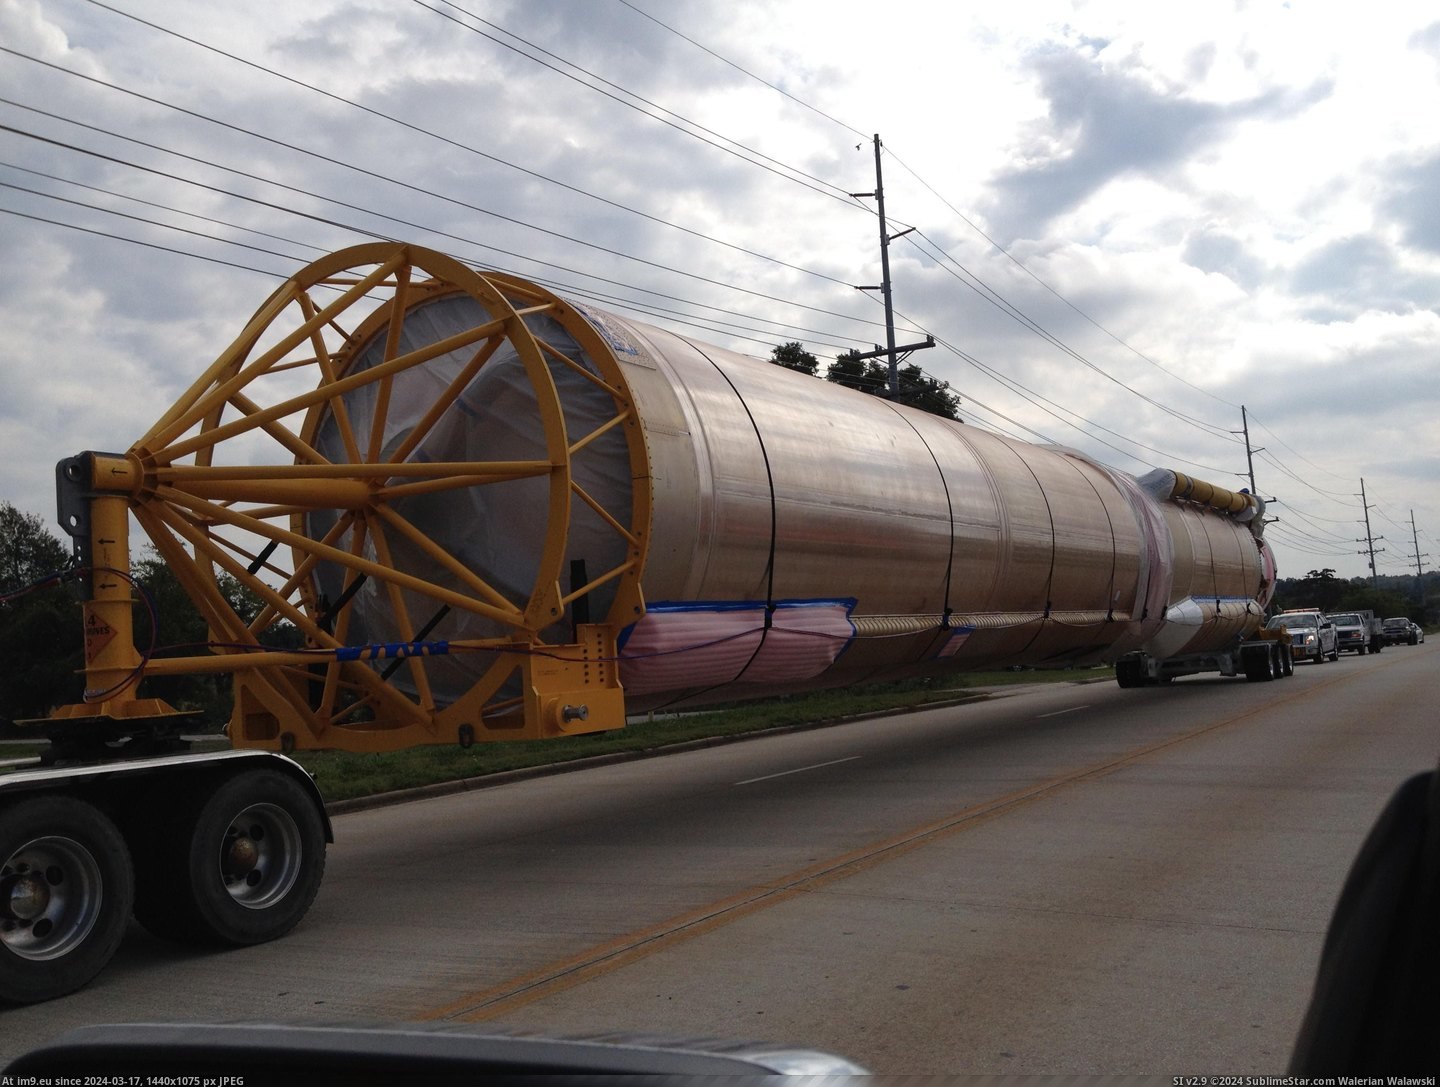 #Road #Rocket #Everyday [Mildlyinteresting] Just your everyday rocket going down the road Pic. (Image of album My r/MILDLYINTERESTING favs))